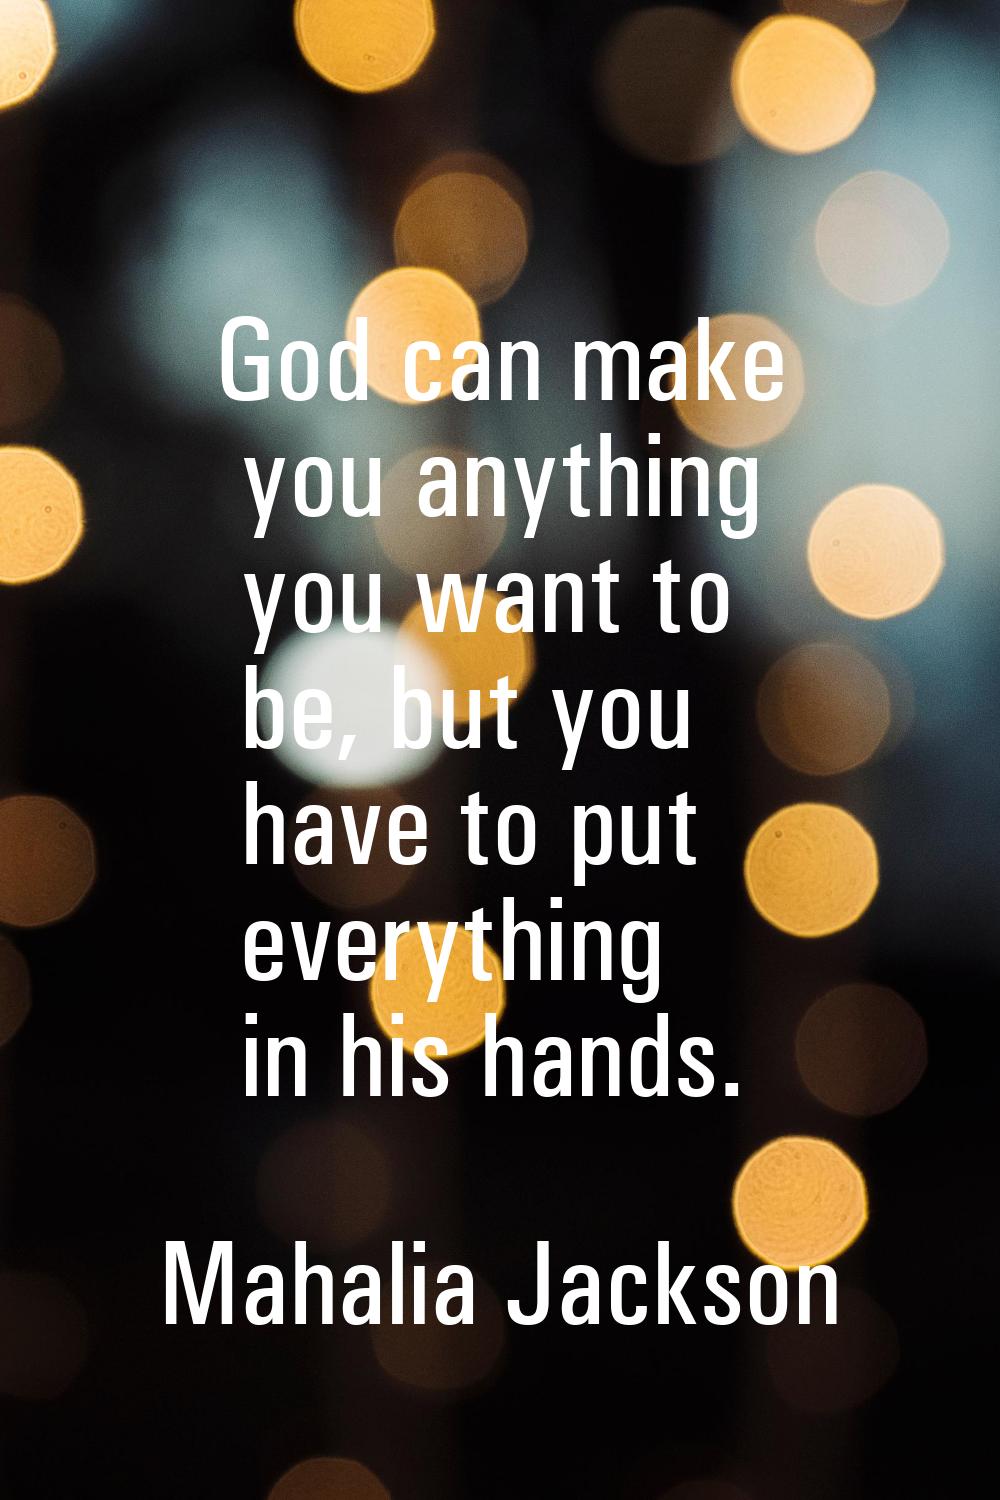 God can make you anything you want to be, but you have to put everything in his hands.